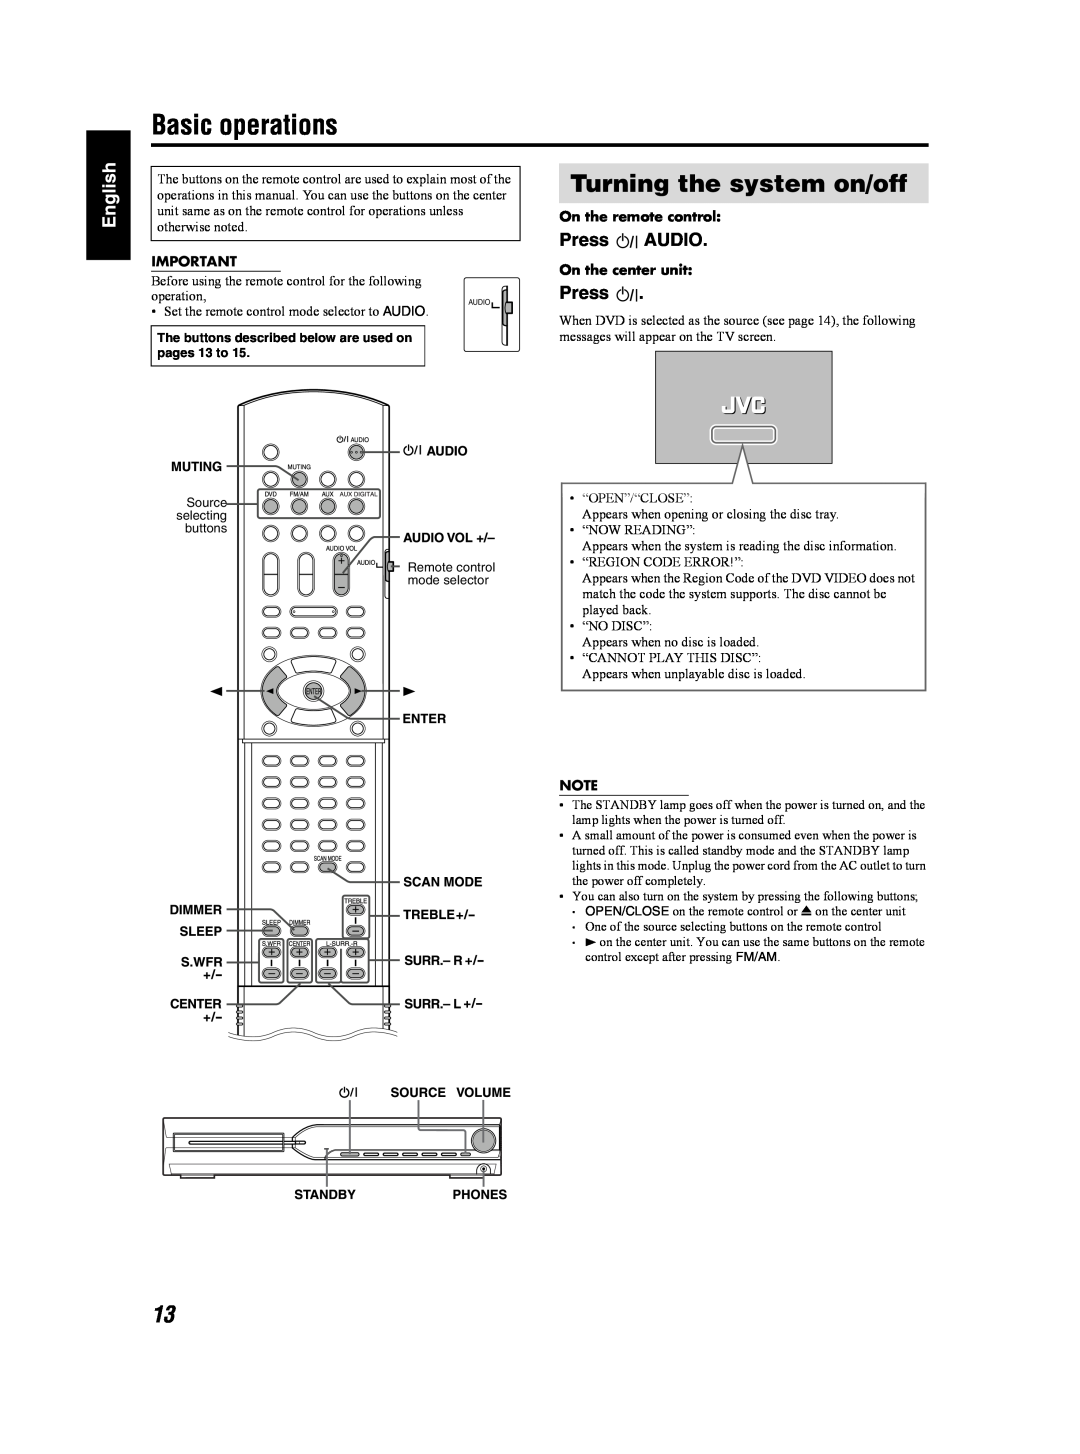 JVC TH-S3 TH-S2 manual Basic operations, Turning the system on/off, Press AUDIO, On the remote control, On the center unit 